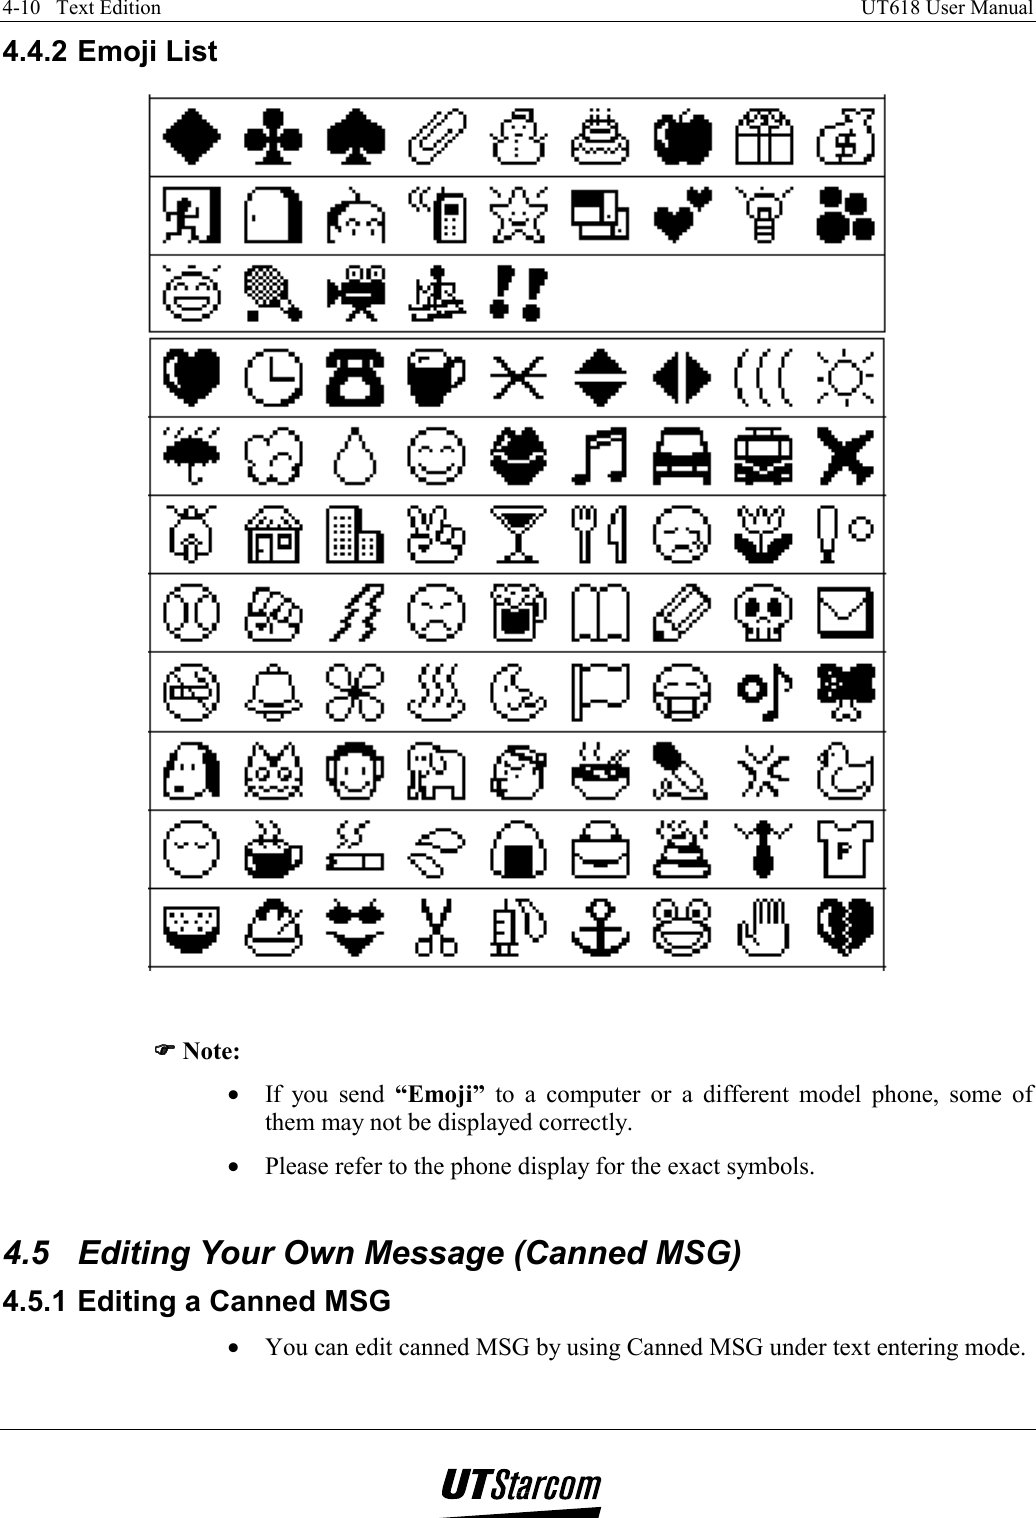 4-10   Text Edition    UT618 User Manual   4.4.2 Emoji List   )))) Note: •  If you send “Emoji” to a computer or a different model phone, some of them may not be displayed correctly. •  Please refer to the phone display for the exact symbols.  4.5  Editing Your Own Message (Canned MSG) 4.5.1 Editing a Canned MSG •  You can edit canned MSG by using Canned MSG under text entering mode. 